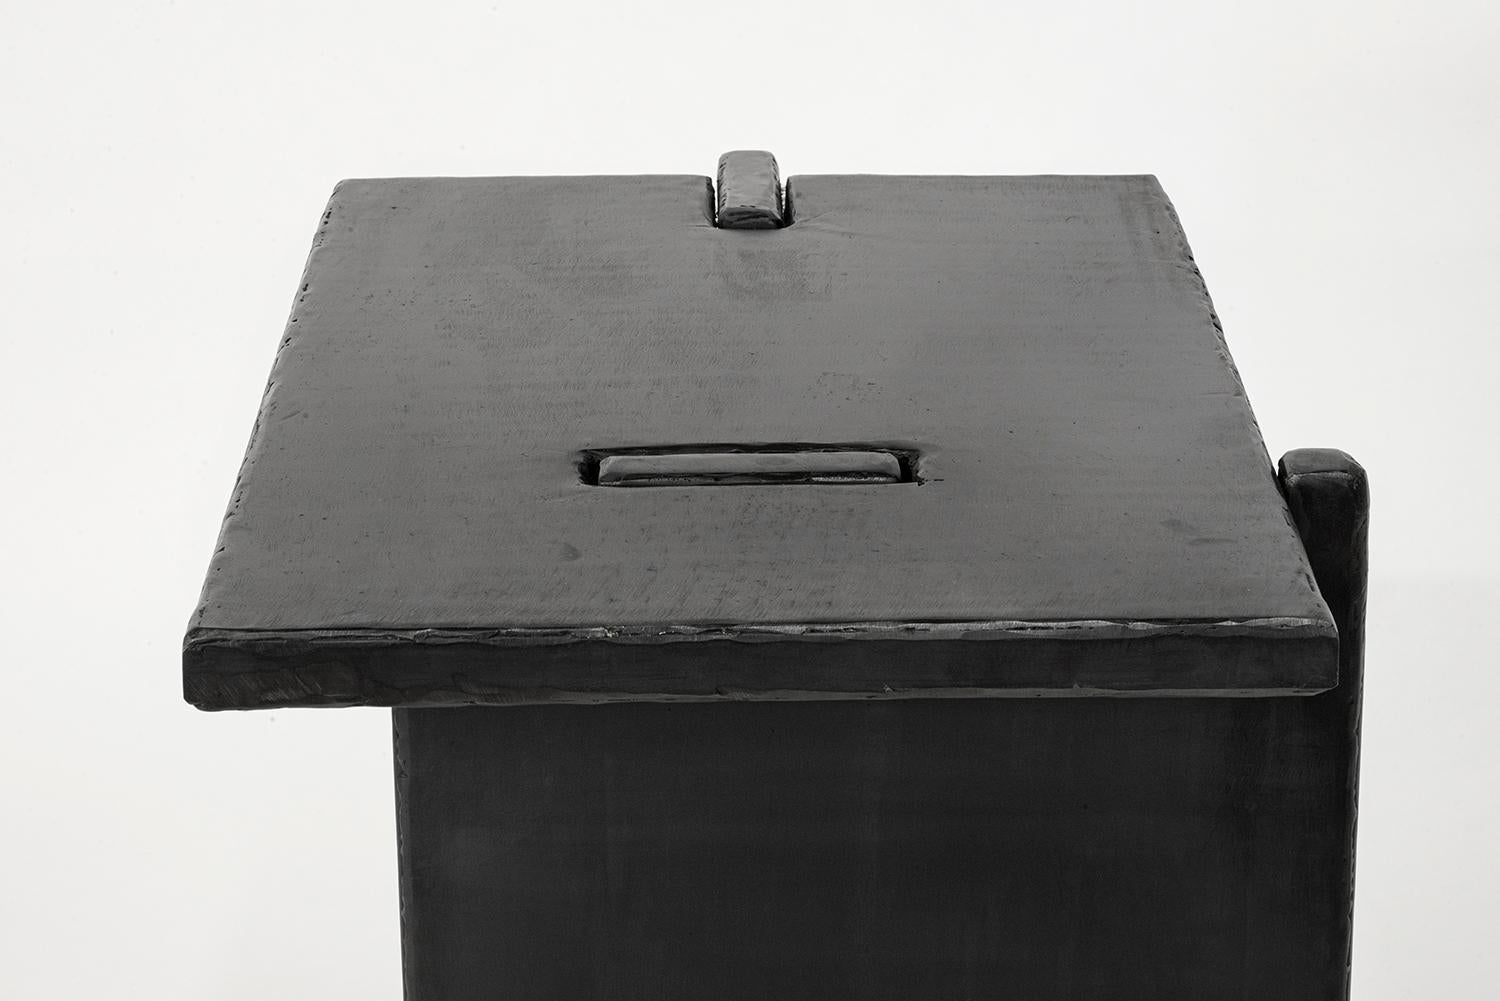 Table No. 5
J.M. Szymanski
d. 2022

This side table is composed of stark, perpendicular planes that have been notched and precisely slotted together. Its hand-carved rough edges contrast beautifully with the continuous flat surfaces that make up its